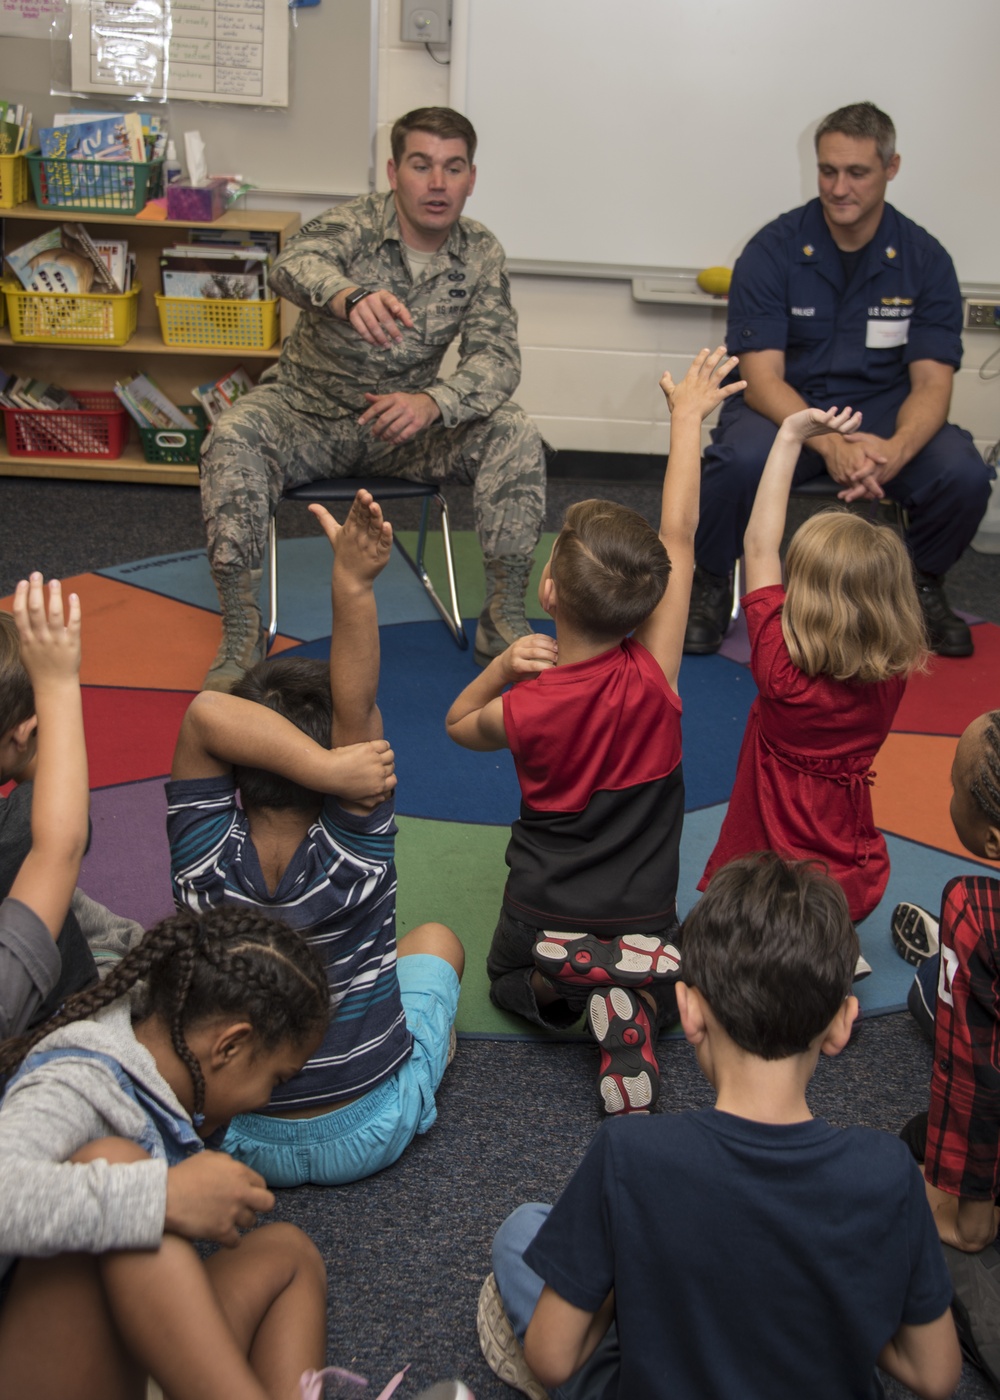 DVIDS Images Coast Guard, Air Force unite for Great American Teach